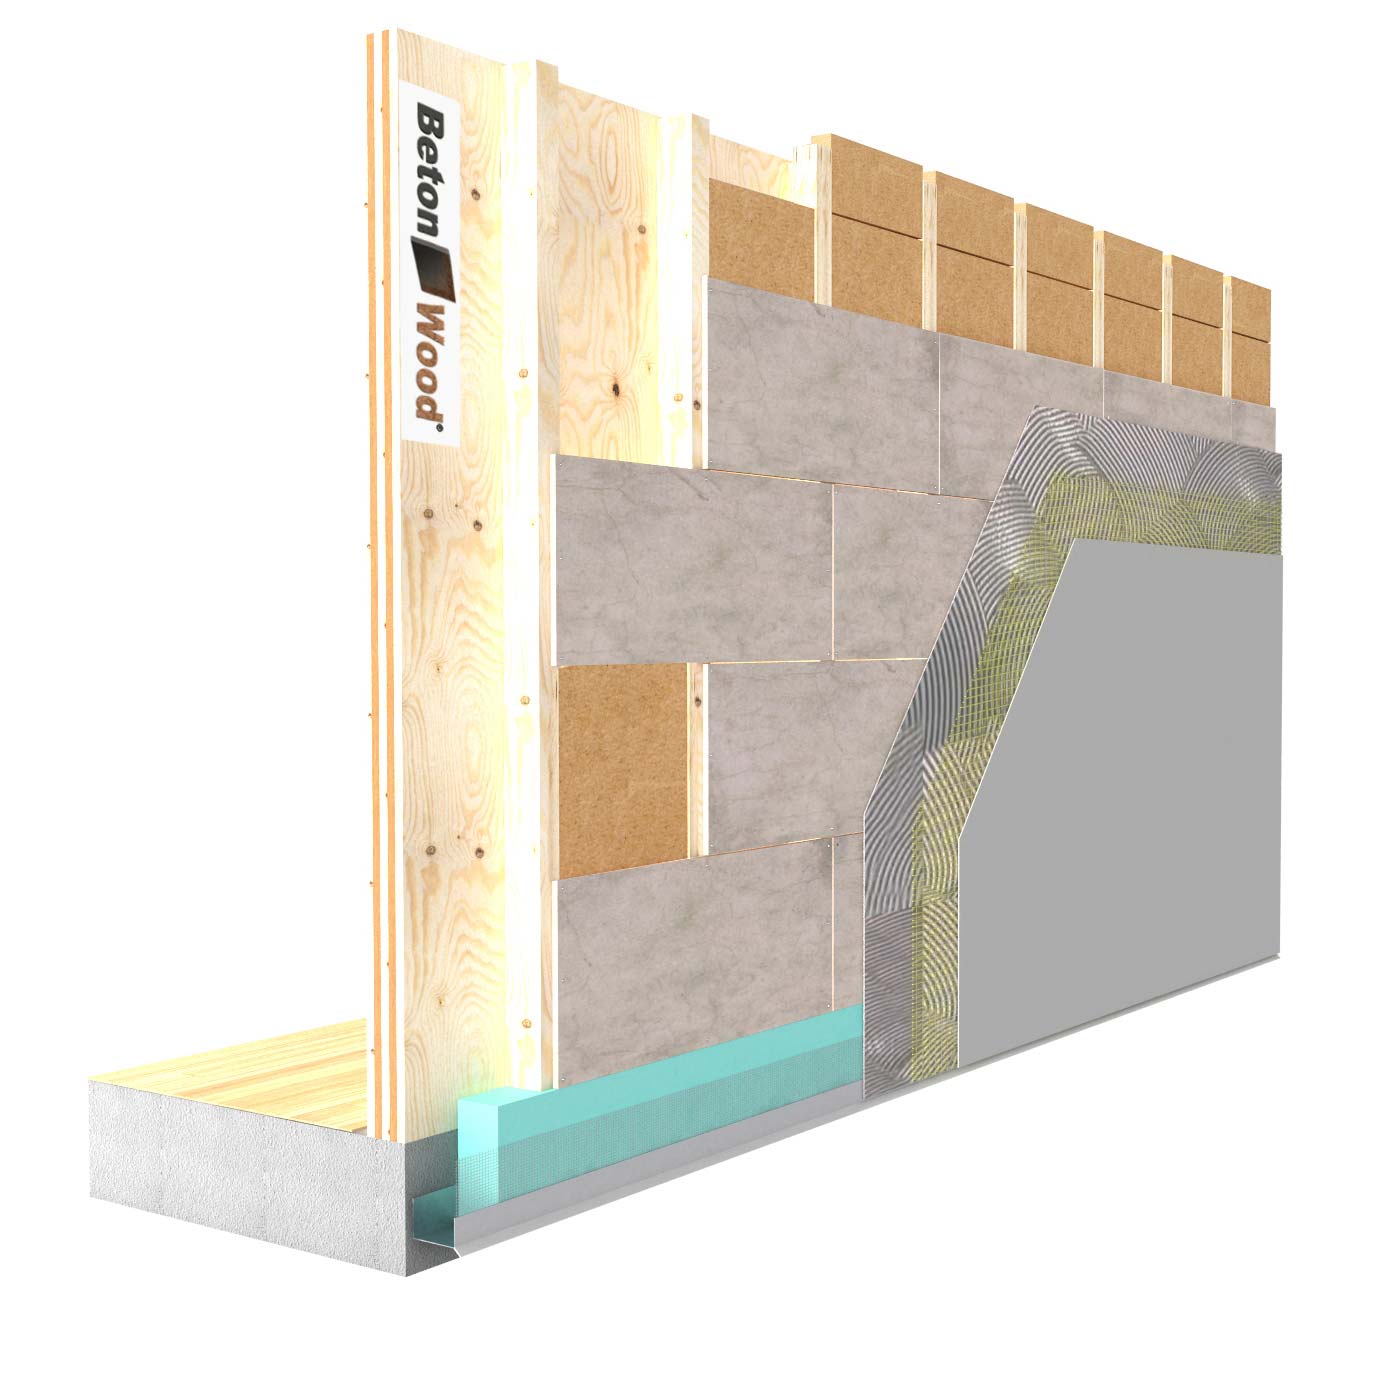 External insulation system with Therm dry fiber wood on wooden walls